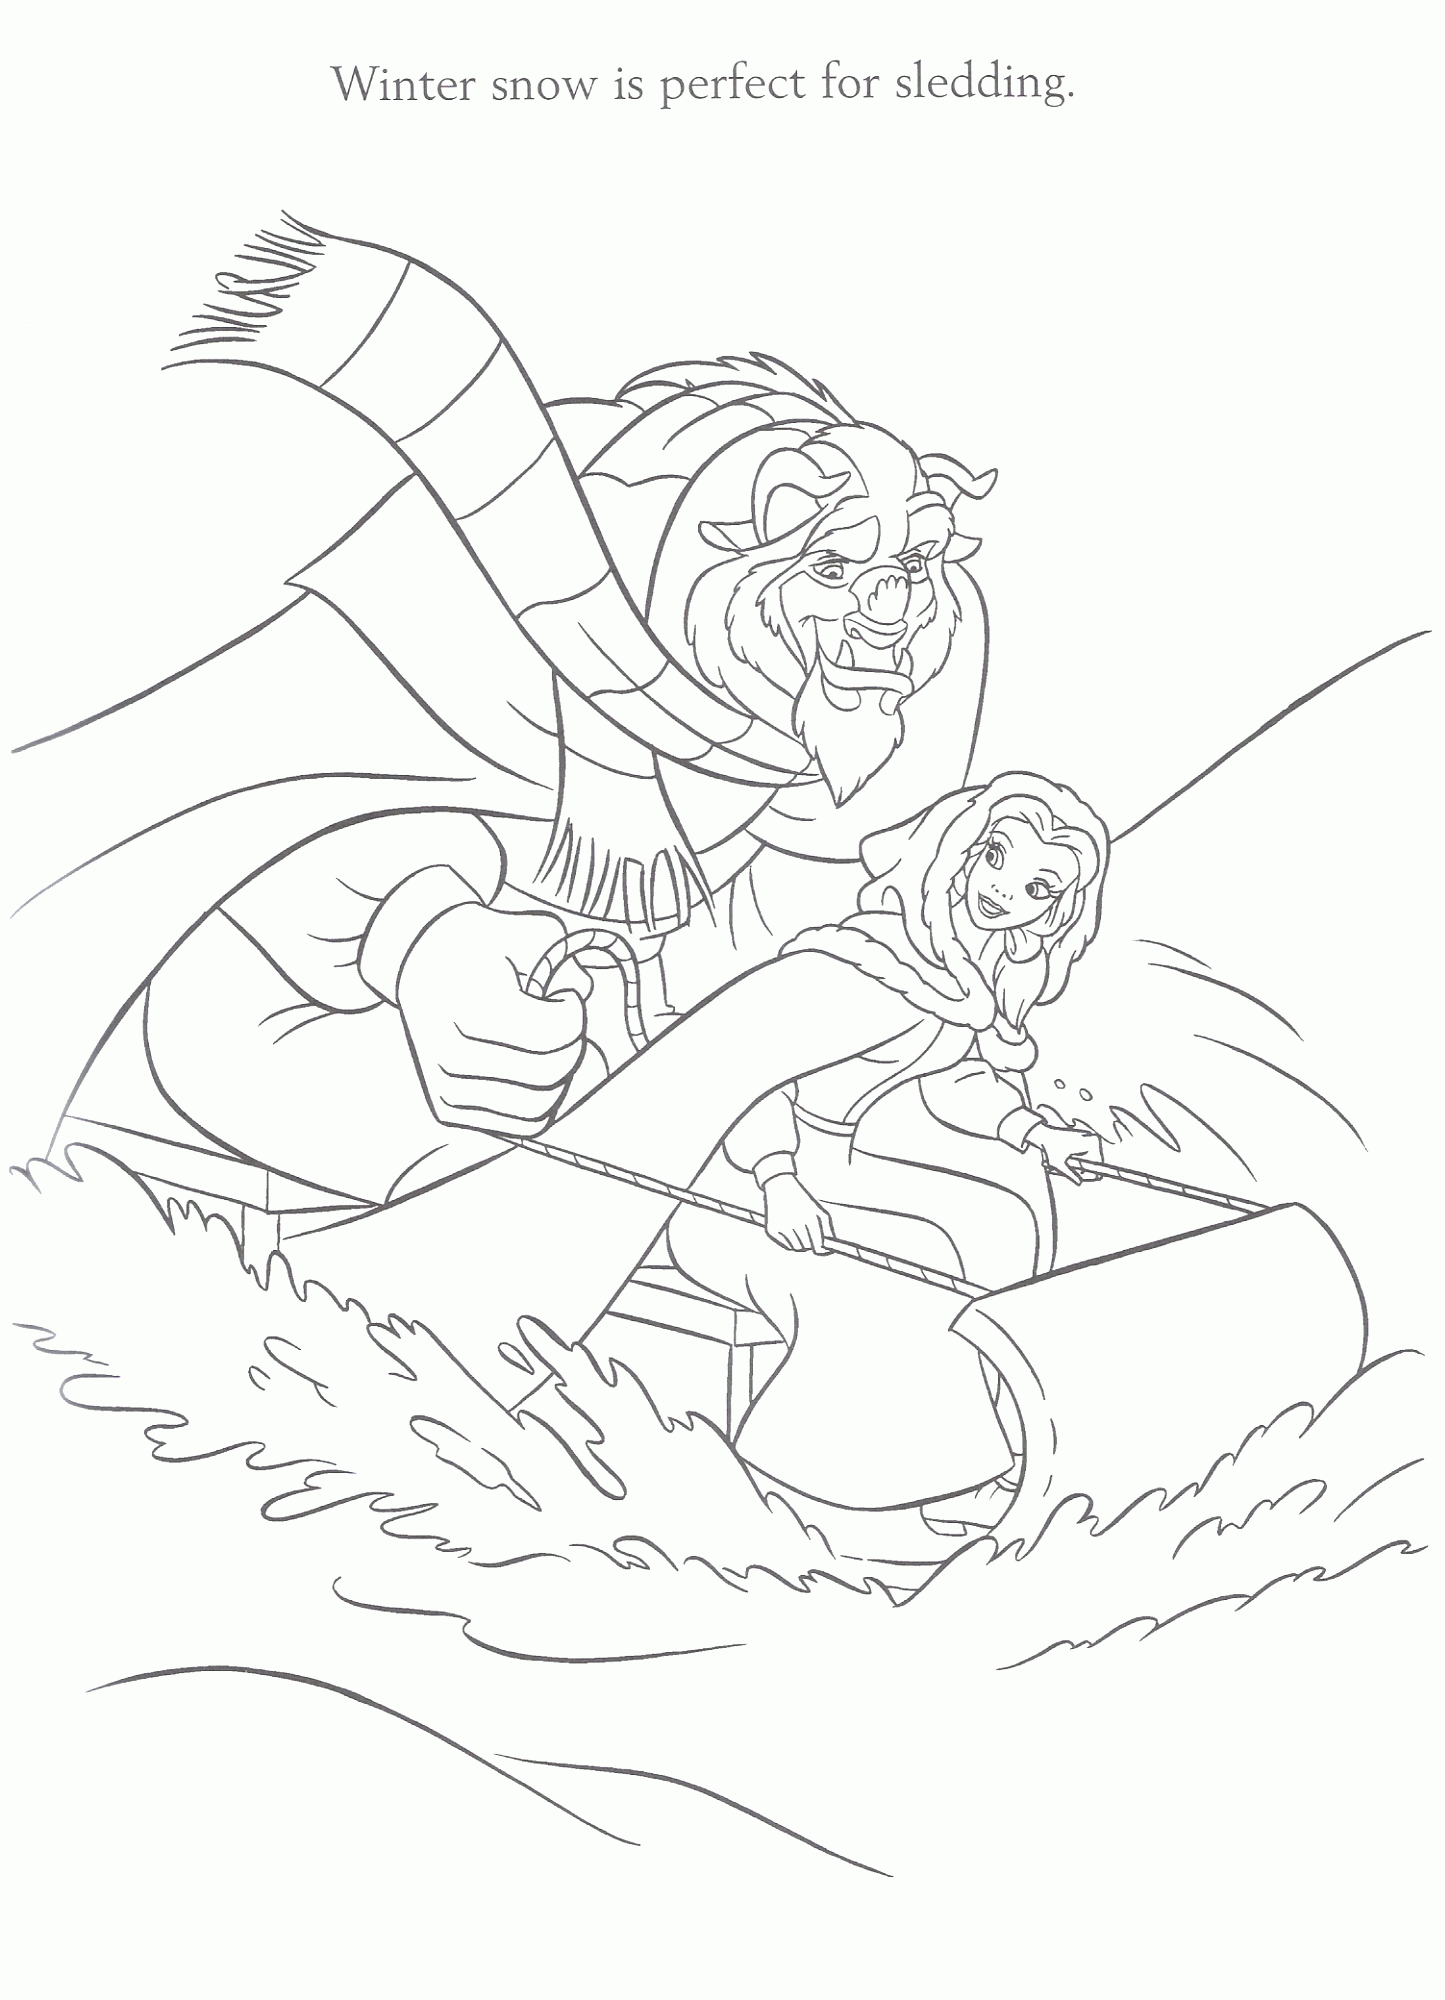 Disney Princess Winter Coloring Pages - Coloring Home